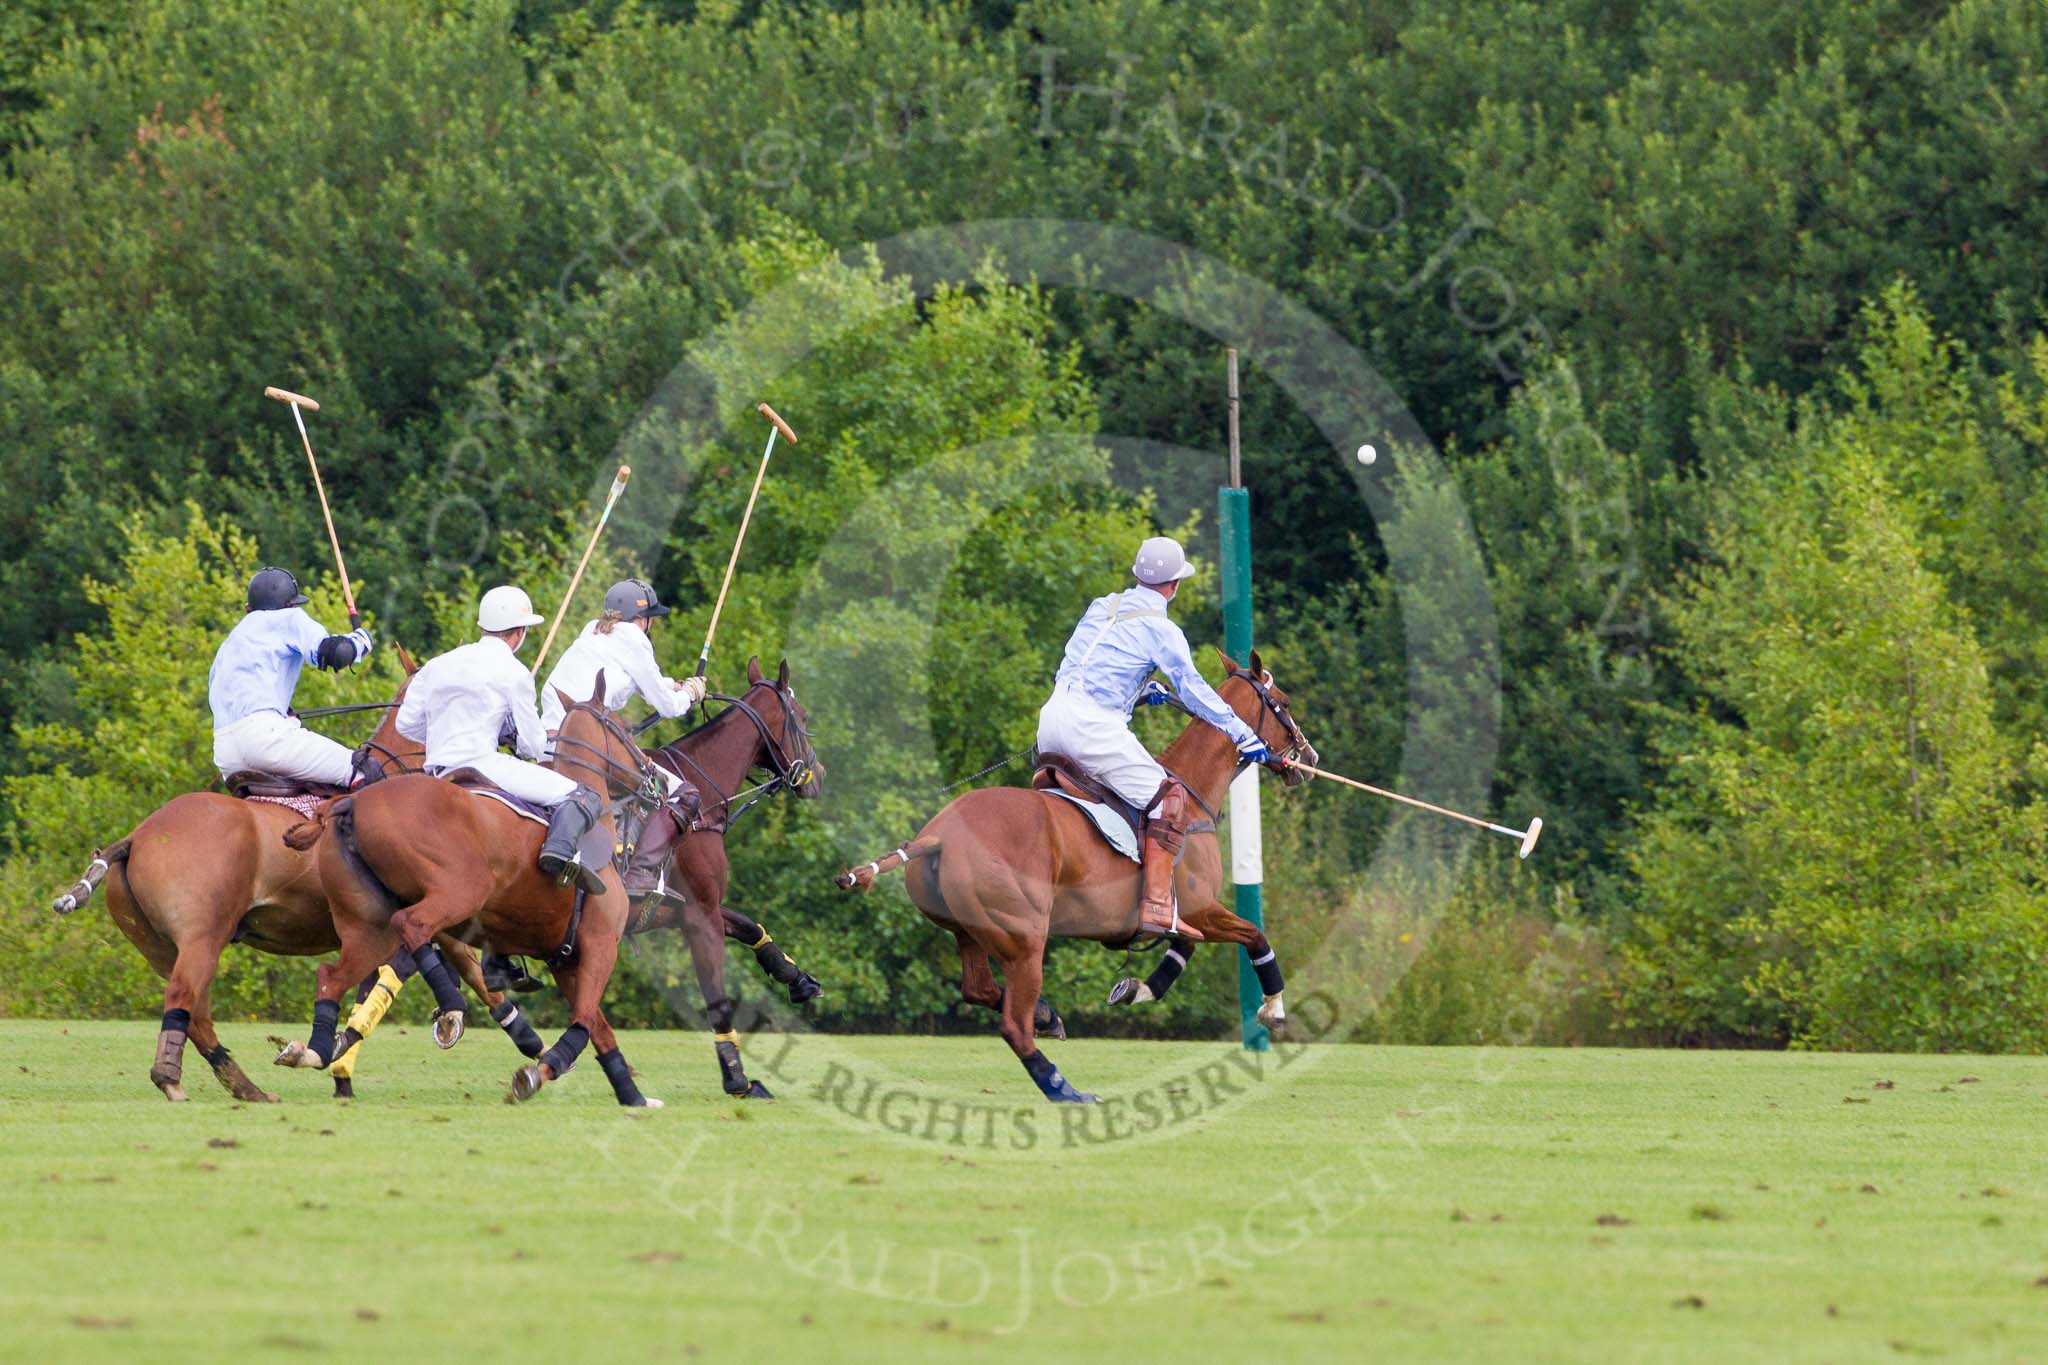 7th Heritage Polo Cup semi-finals: La Mariposa Argentina Timothy Rose following the ball with Brownie Taylor on his side..
Hurtwood Park Polo Club,
Ewhurst Green,
Surrey,
United Kingdom,
on 04 August 2012 at 15:53, image #295